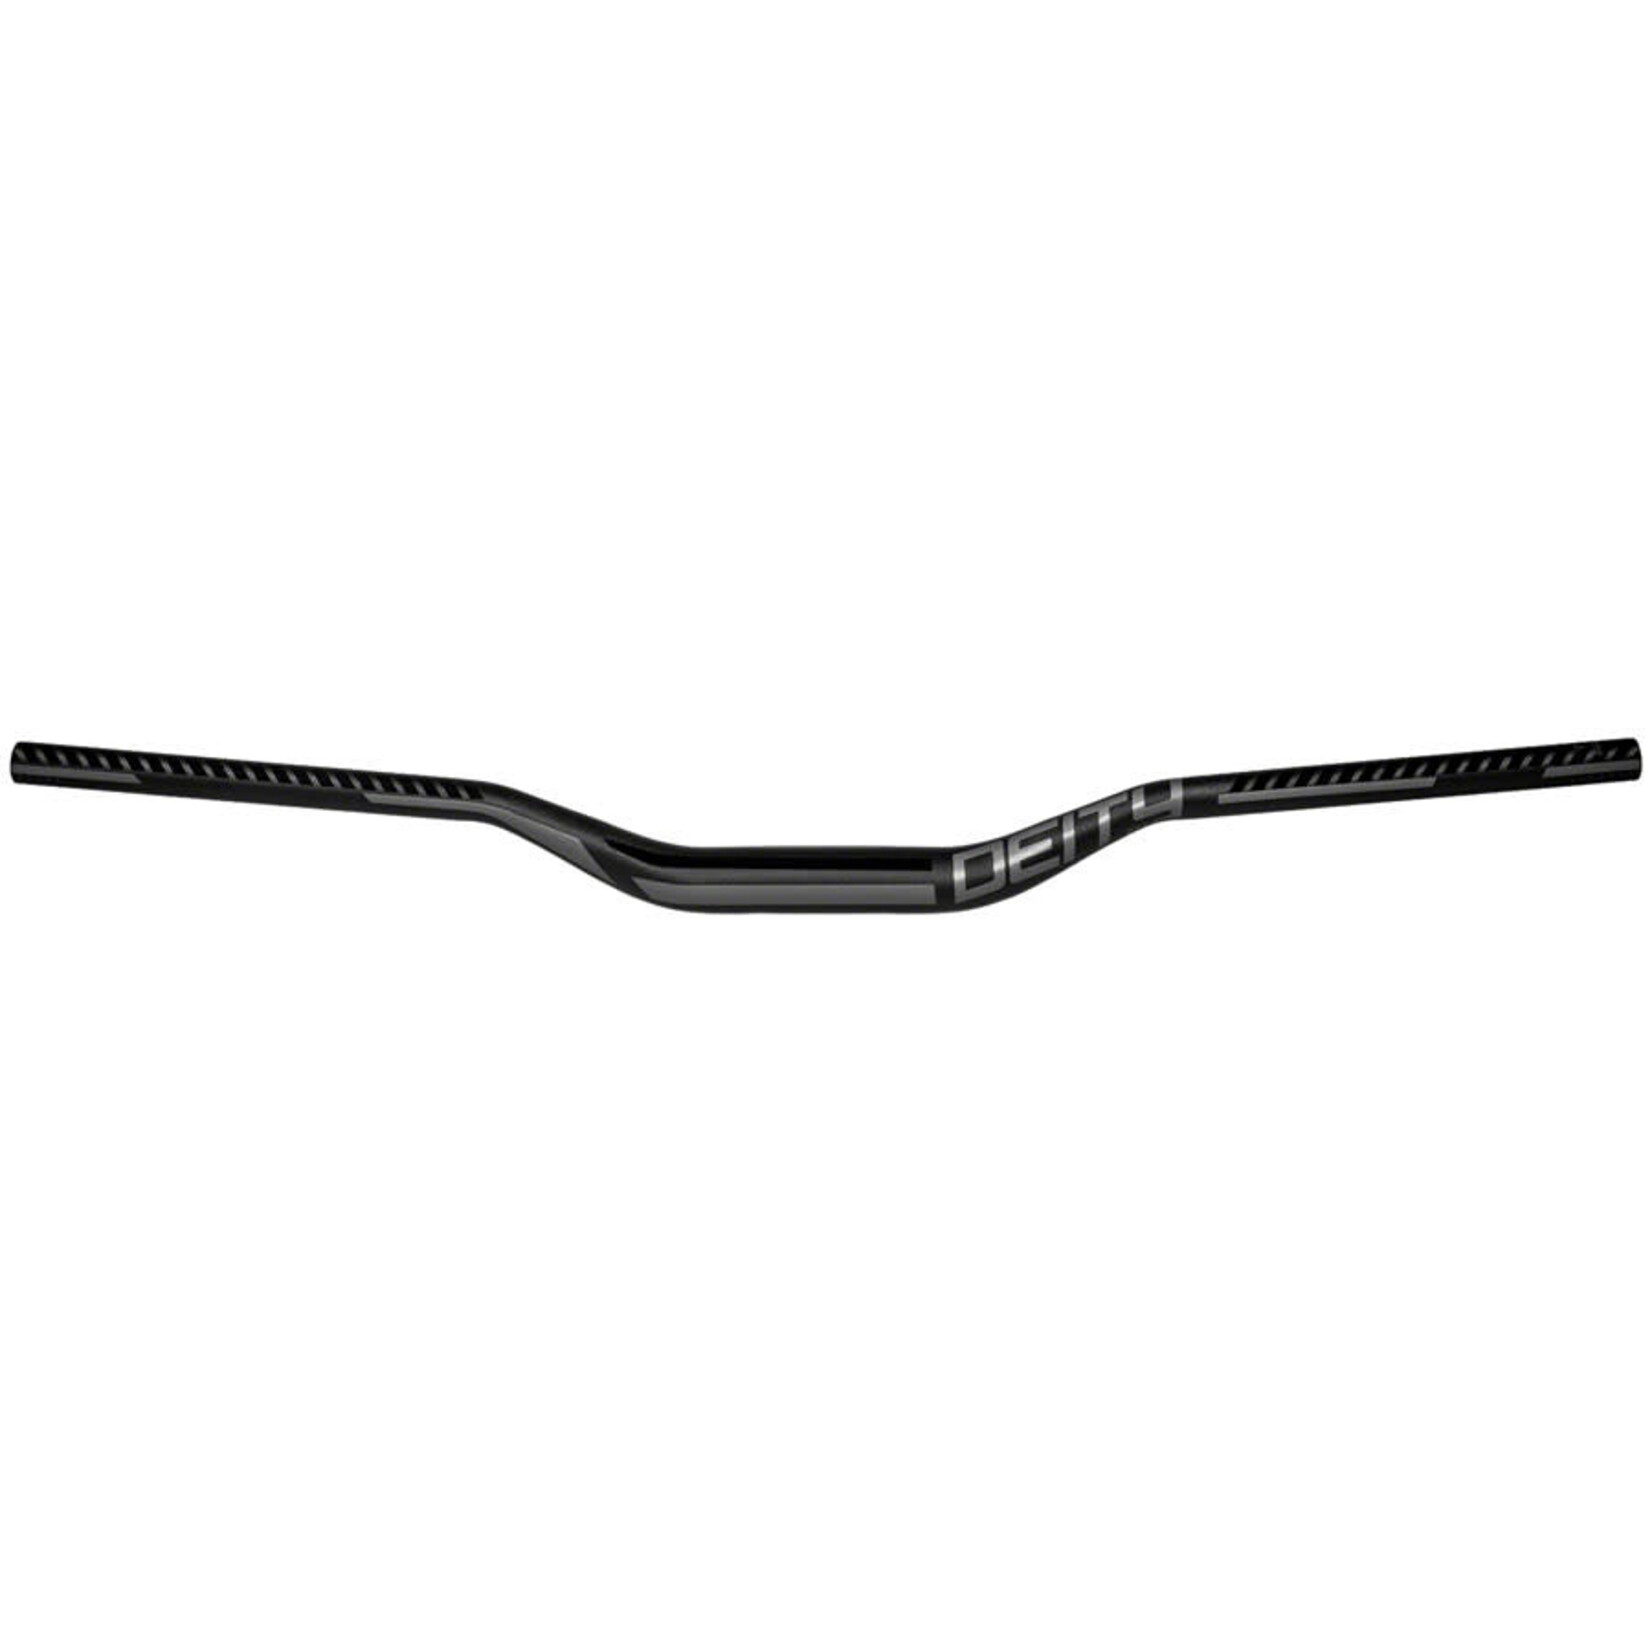 Deity Components Racepoint 35 Handlebar: 810mm Width, 35mm Clamp, Stealth